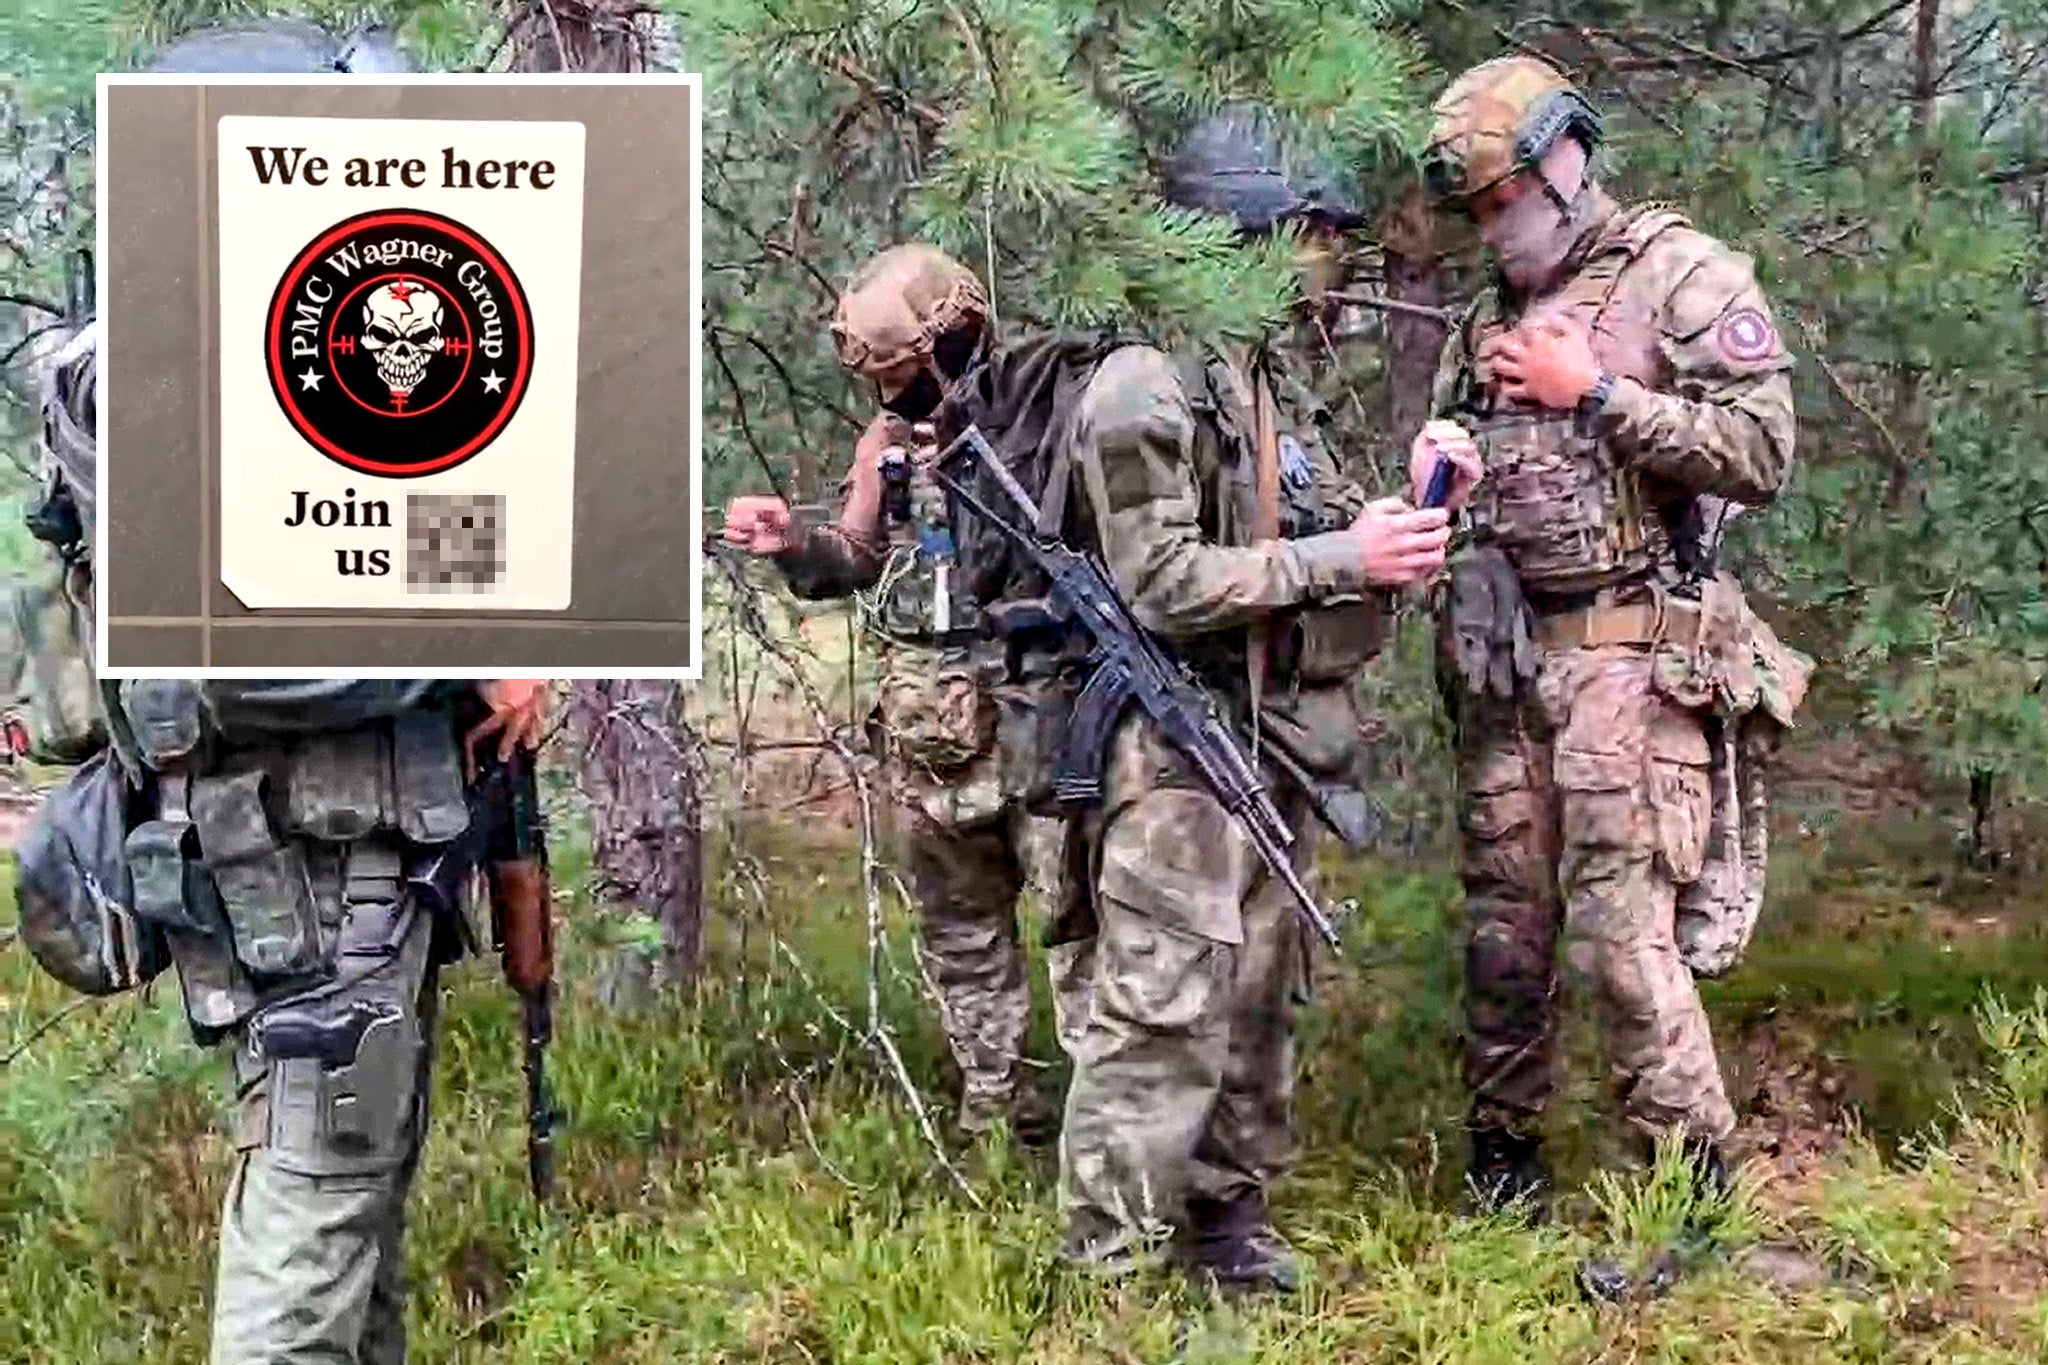 Wagner Mercenaries Issue A Chilling Message On Polands Doorstep ‘we